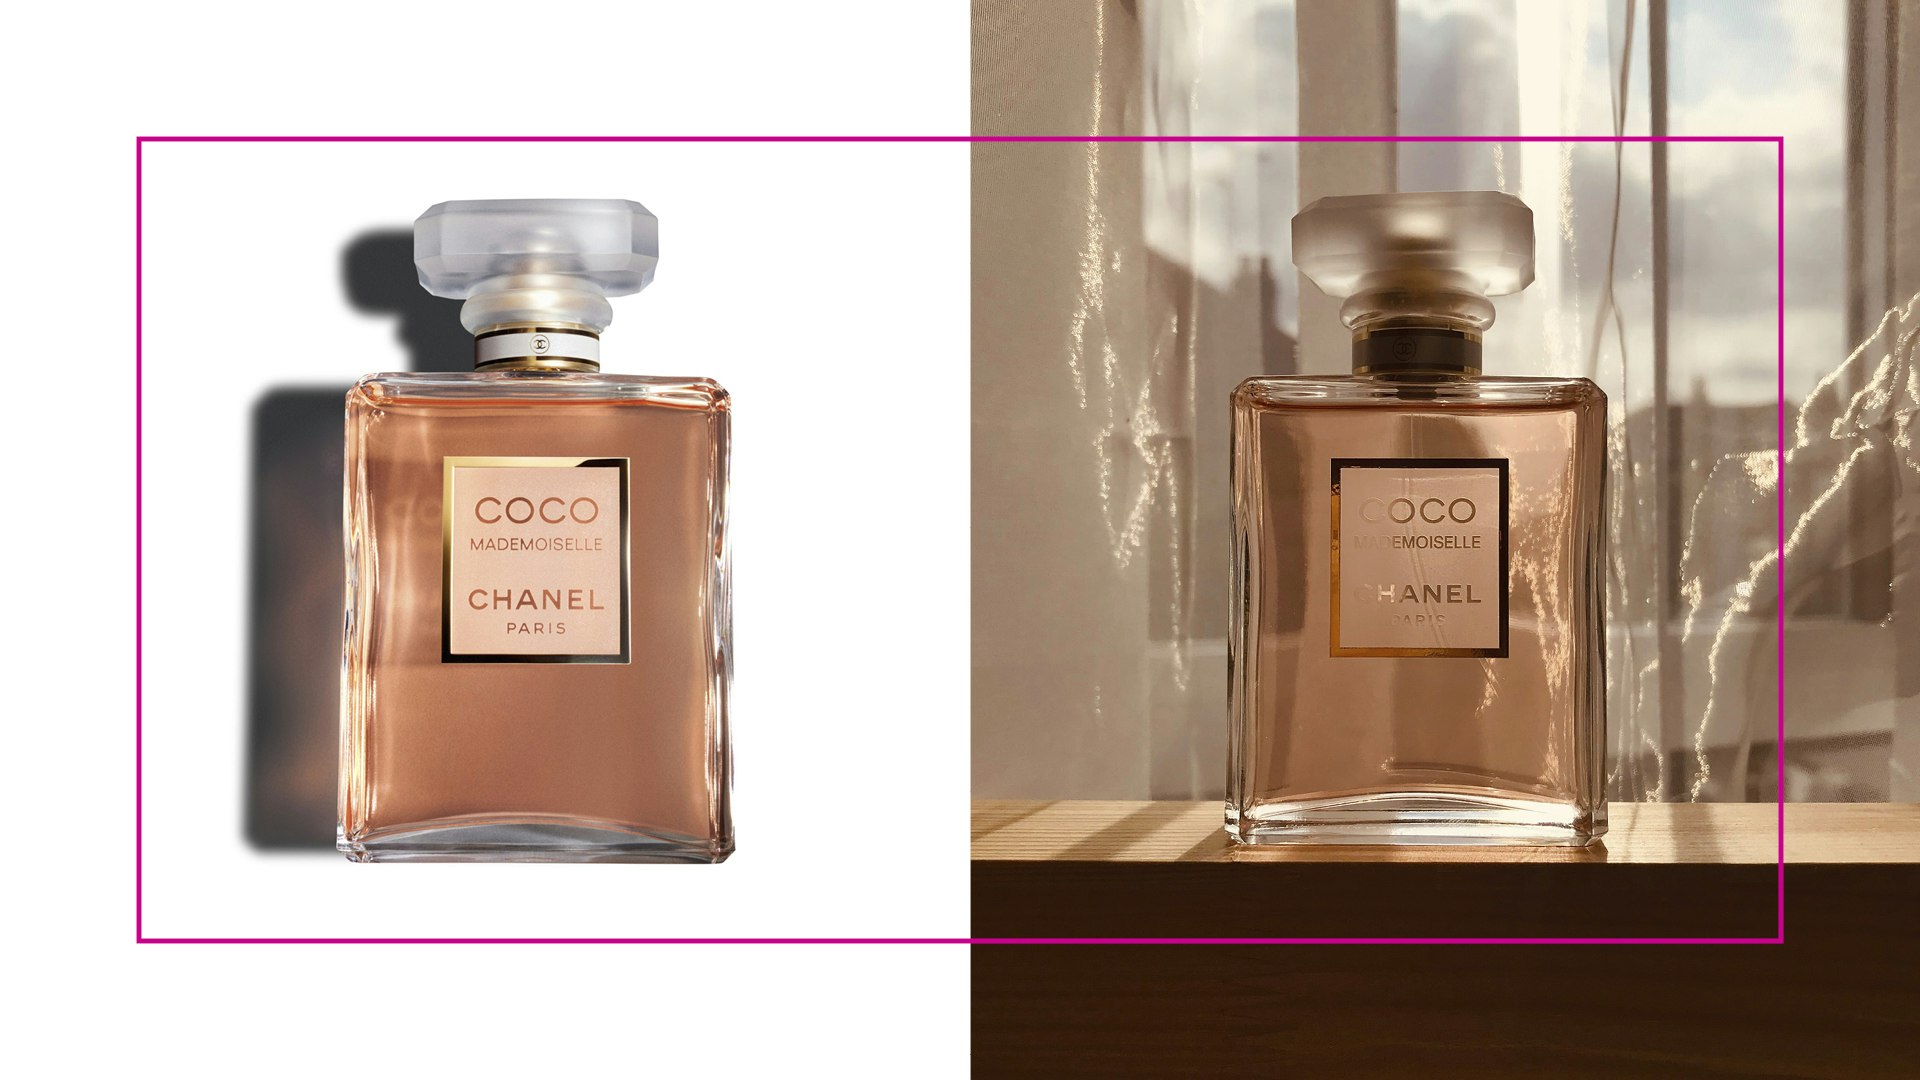 Whitney Peak is the New Face of Coco Mademoiselle! ~ Fragrance News